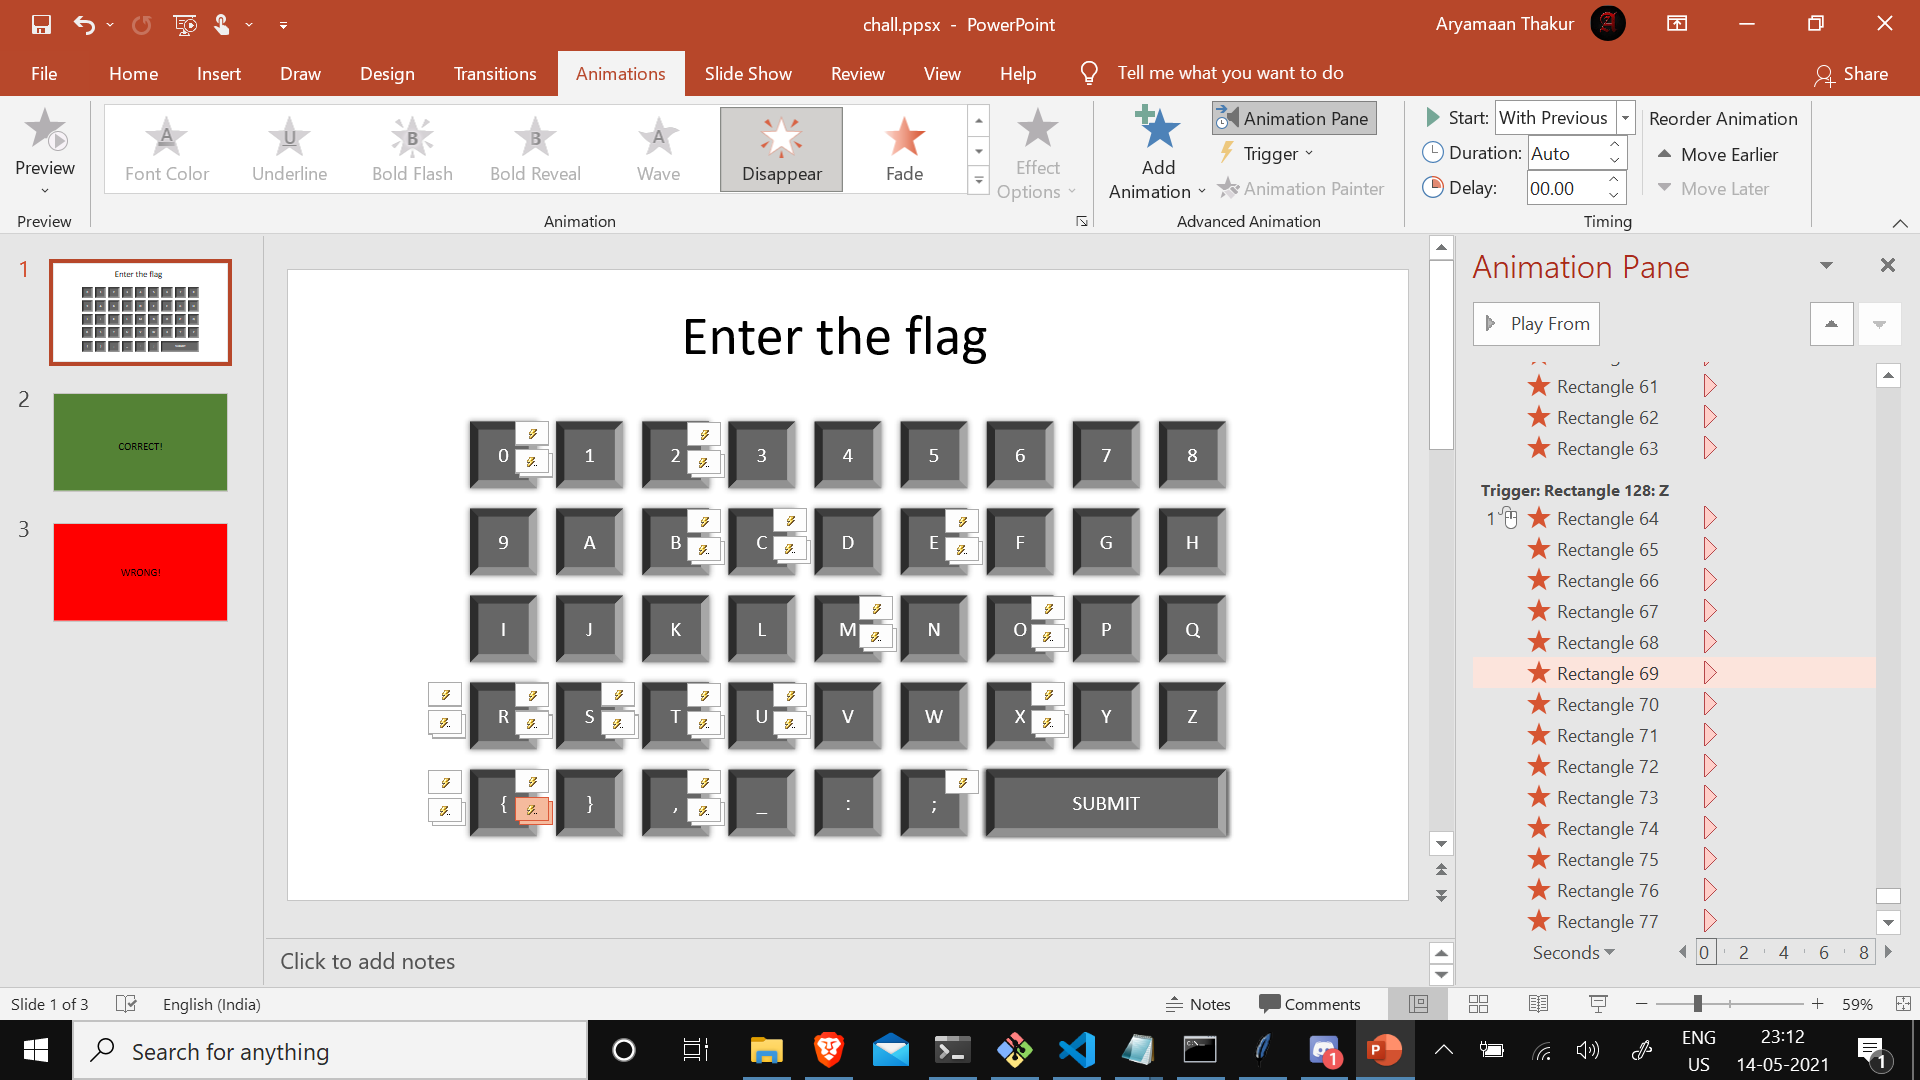 Powerpoint file animations pane